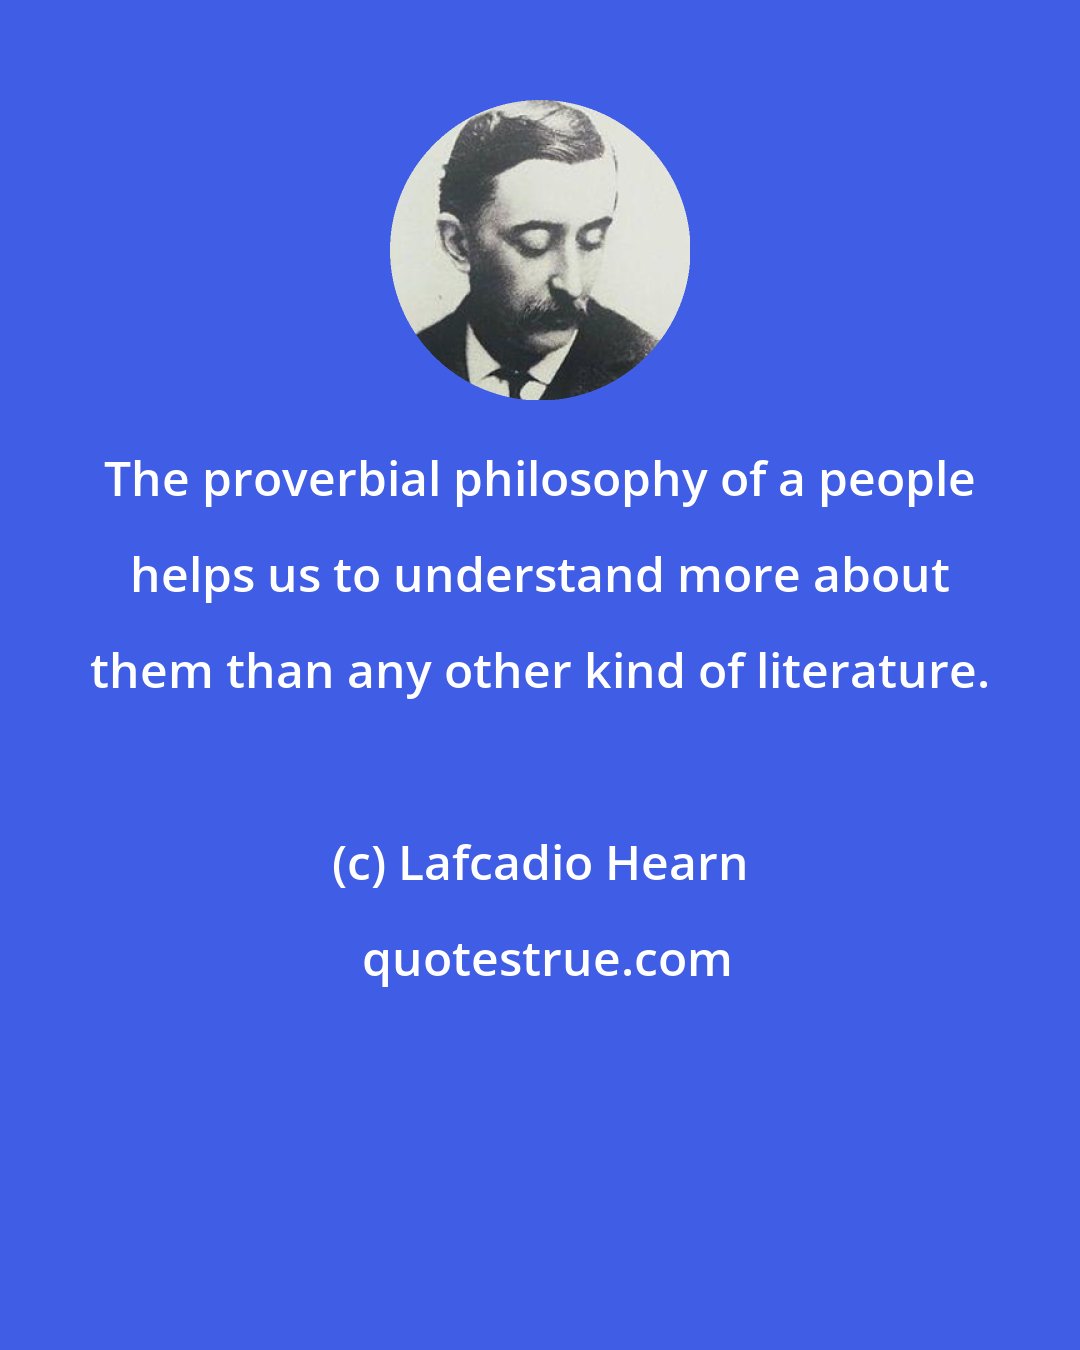 Lafcadio Hearn: The proverbial philosophy of a people helps us to understand more about them than any other kind of literature.